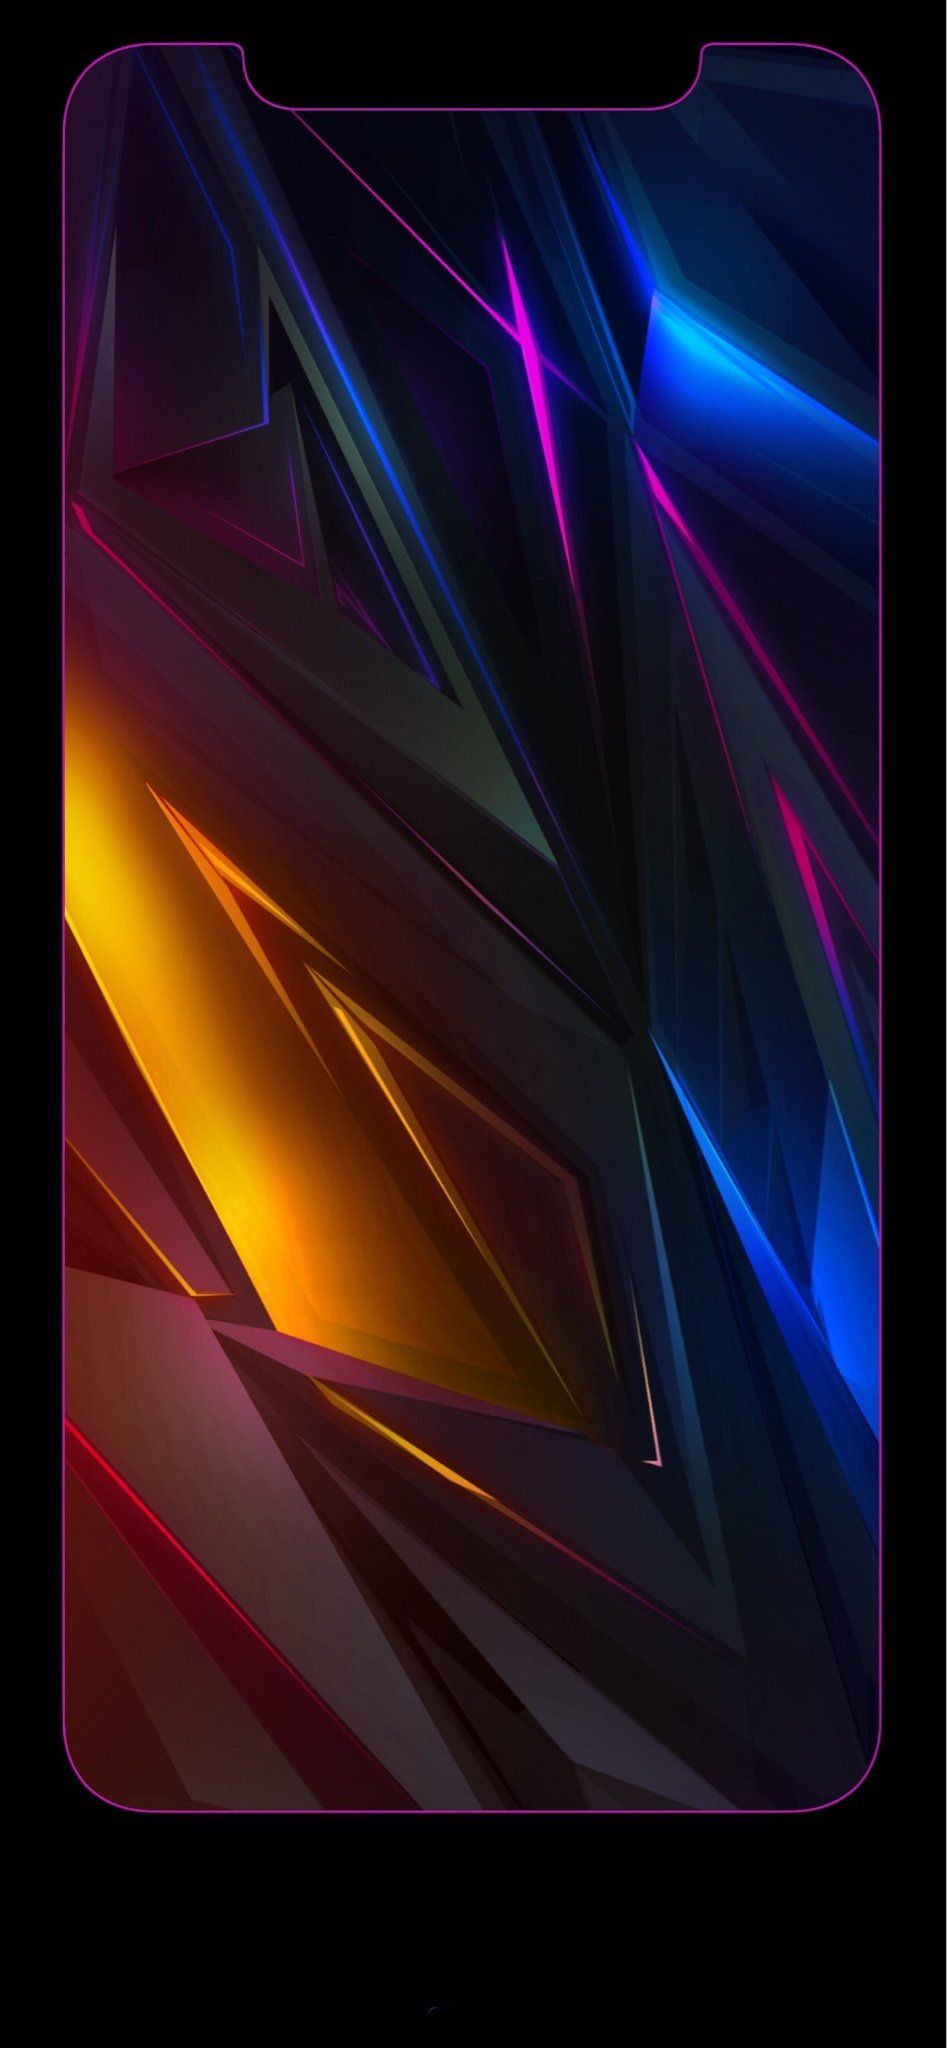 Download iPhone Xs Max Wallpaper With Border